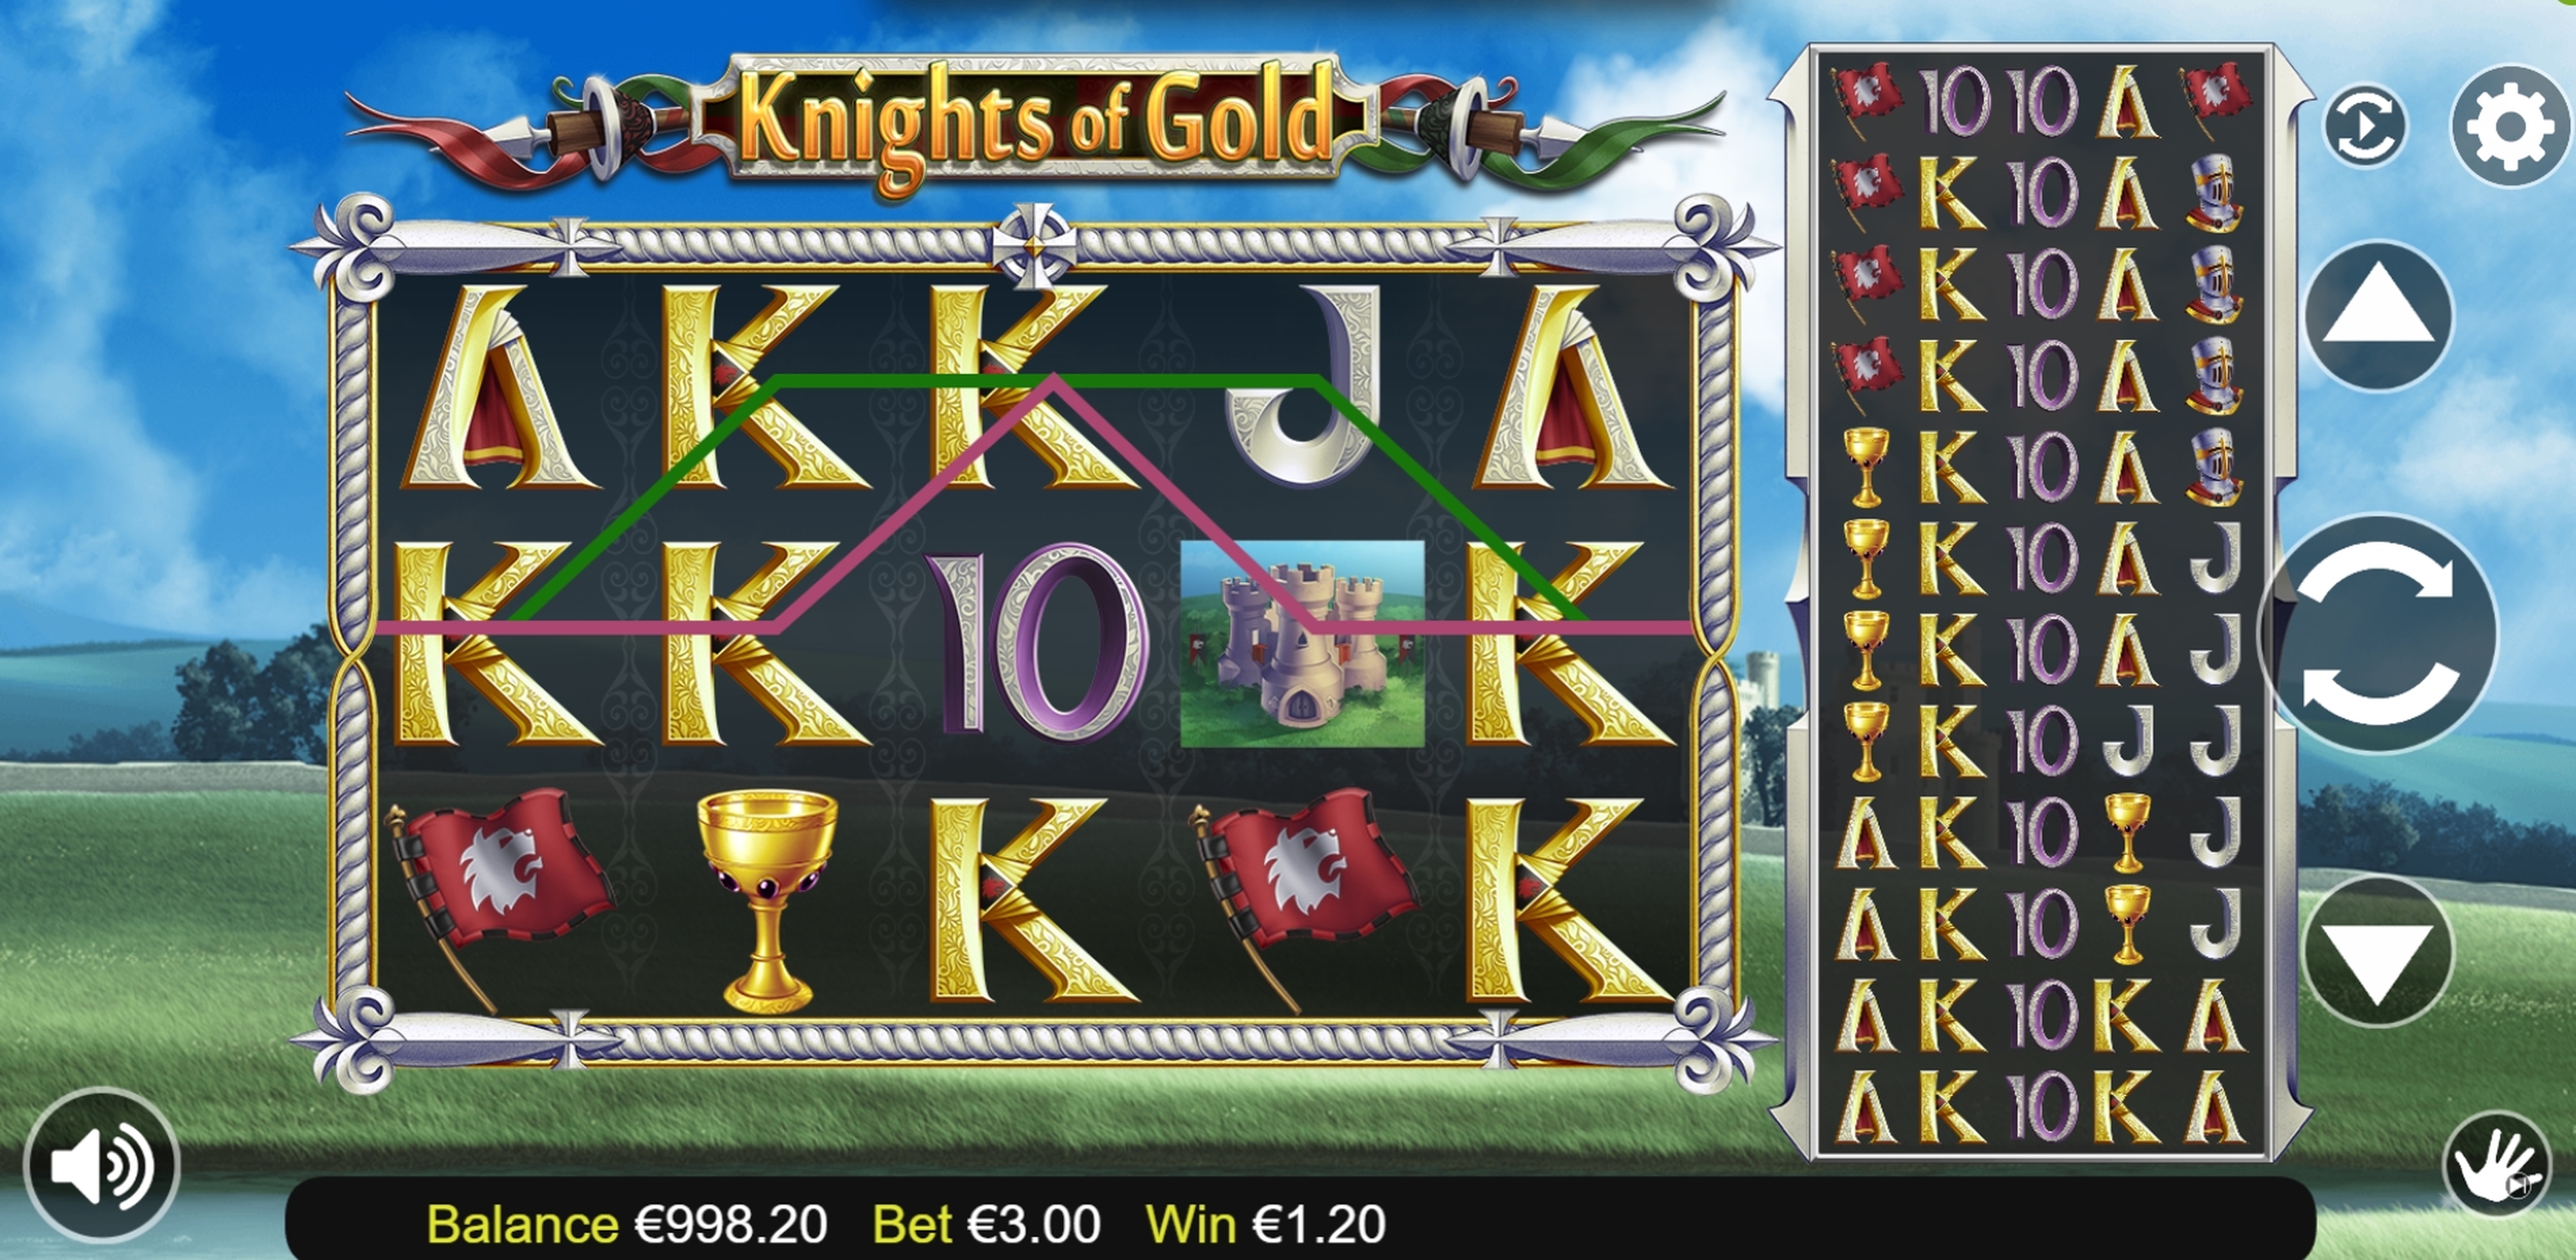 Win Money in Knights of Gold Free Slot Game by Betdigital